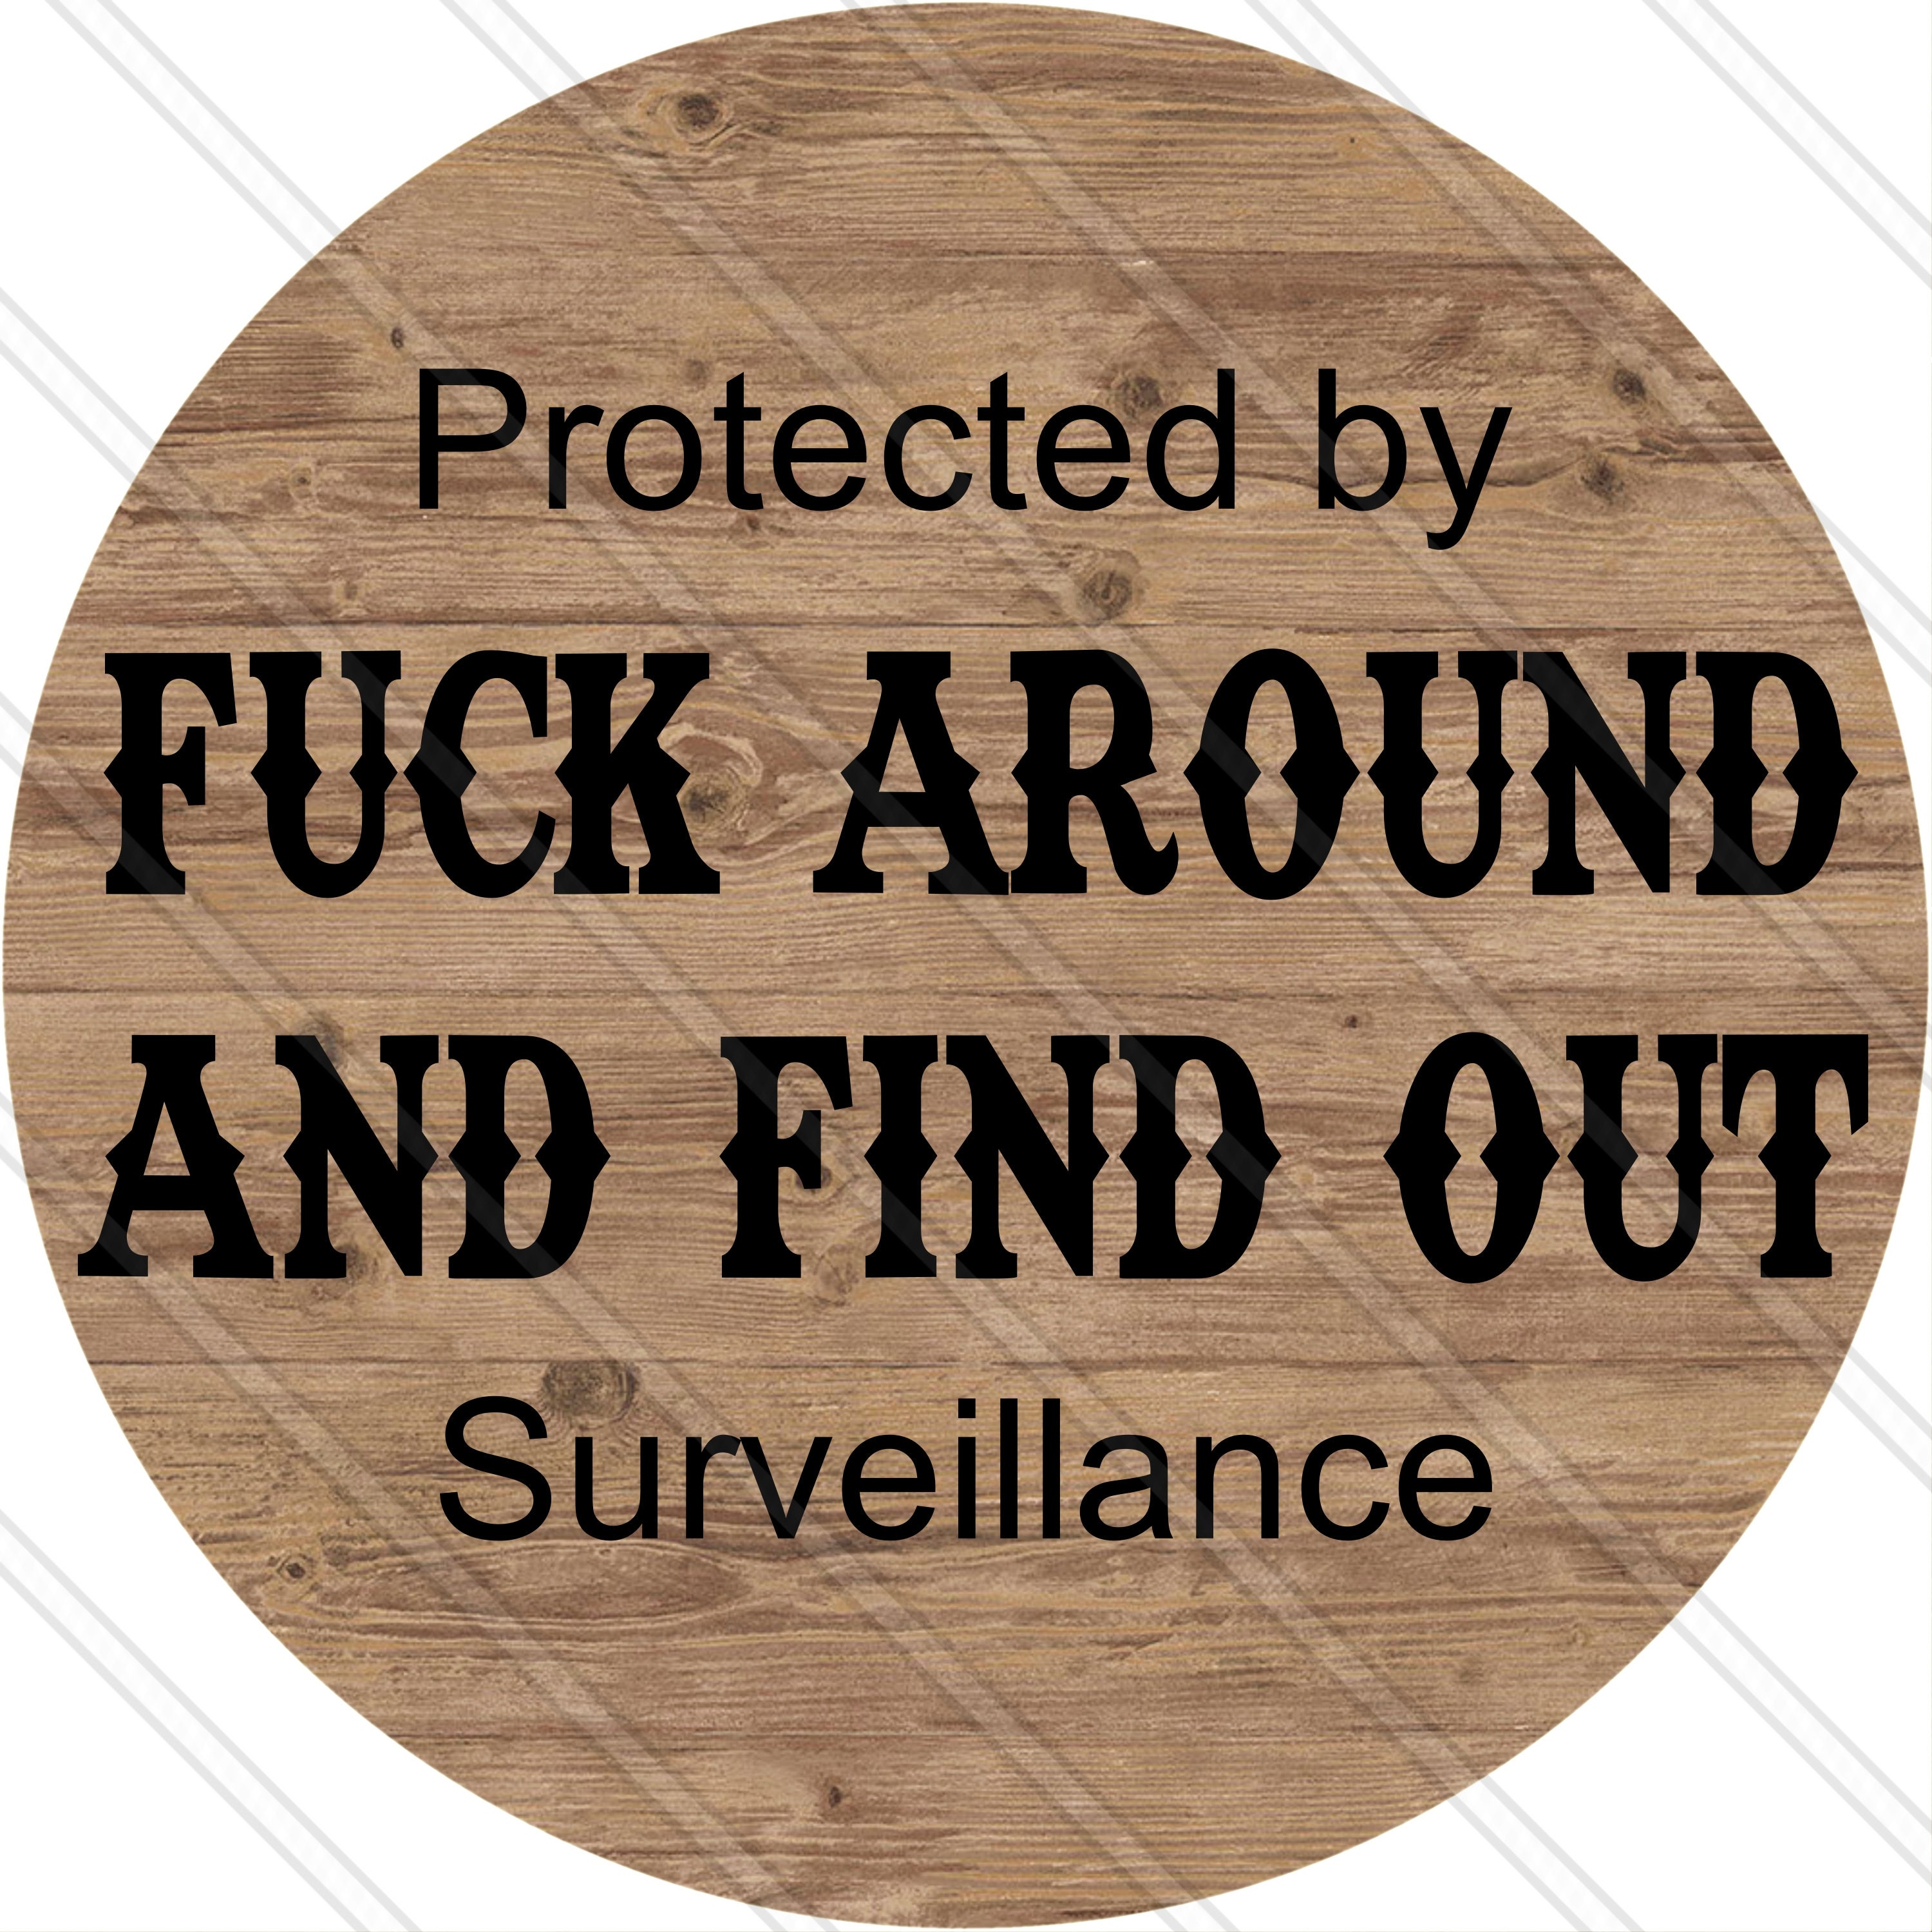 Fuck Around and Find Out DECAL AR 15 Second Amendment Vinyl Decal Sticker  Custom Made to Order -  Sweden